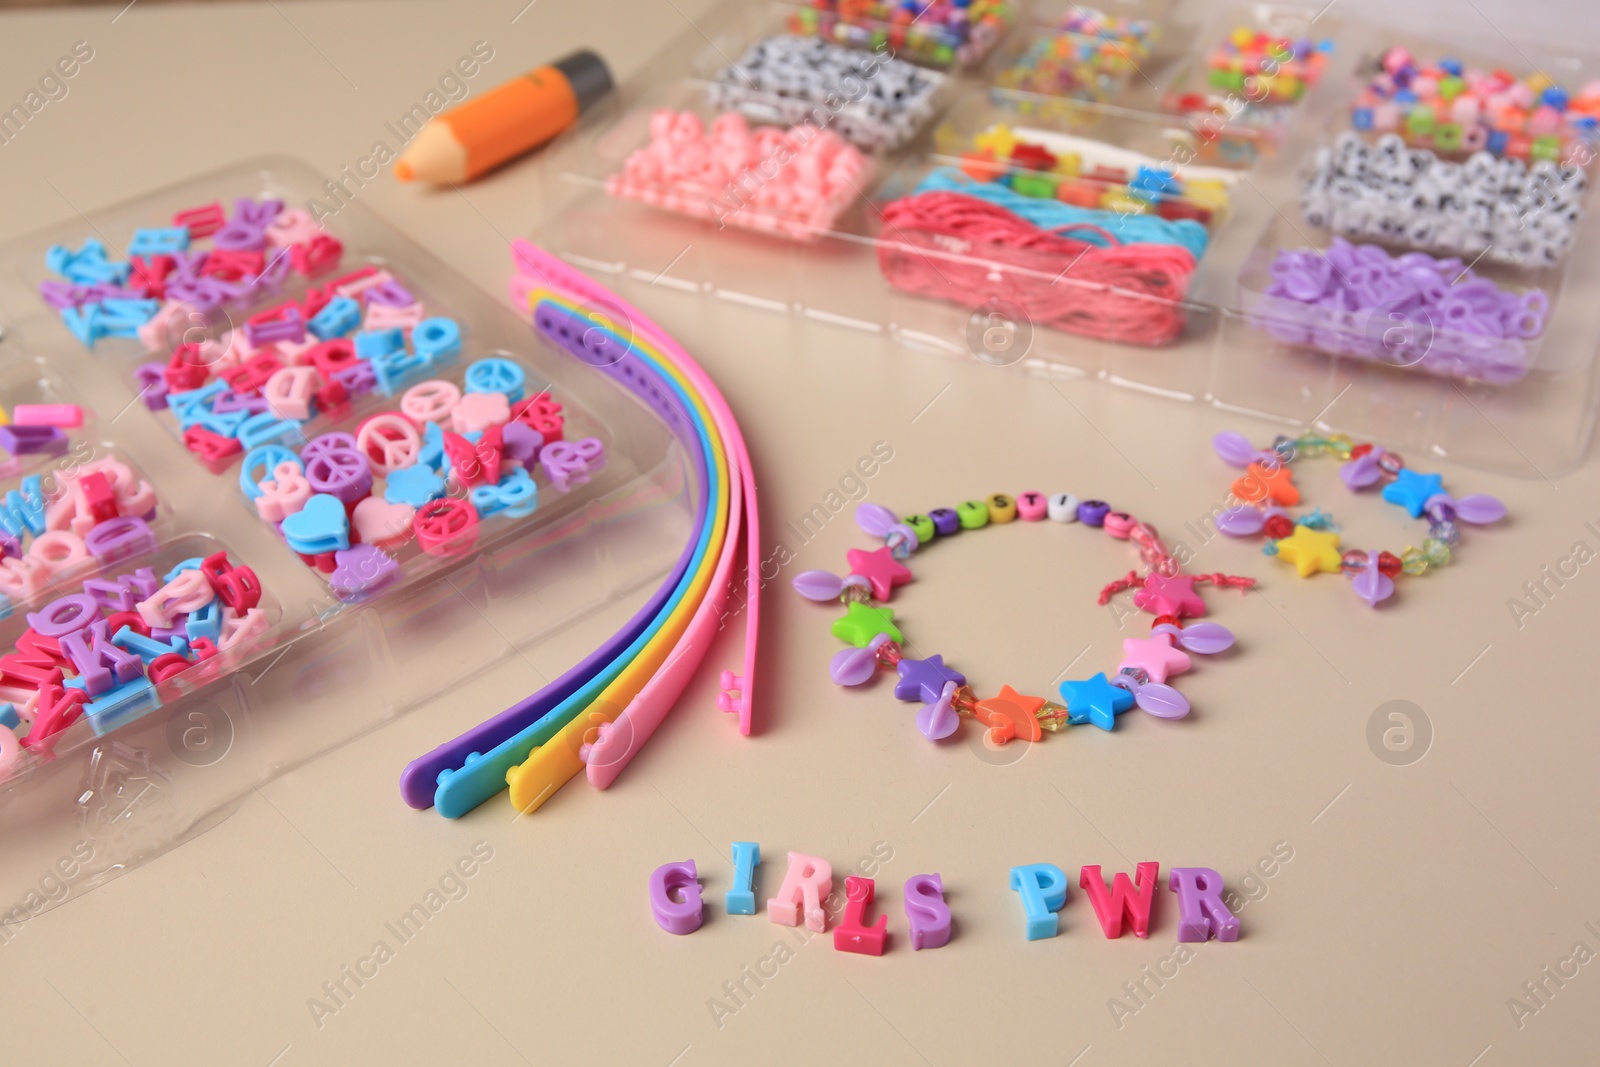 Photo of Handmade jewelry kit for kids. Colorful beads, wristbands and bracelets on beige background, closeup